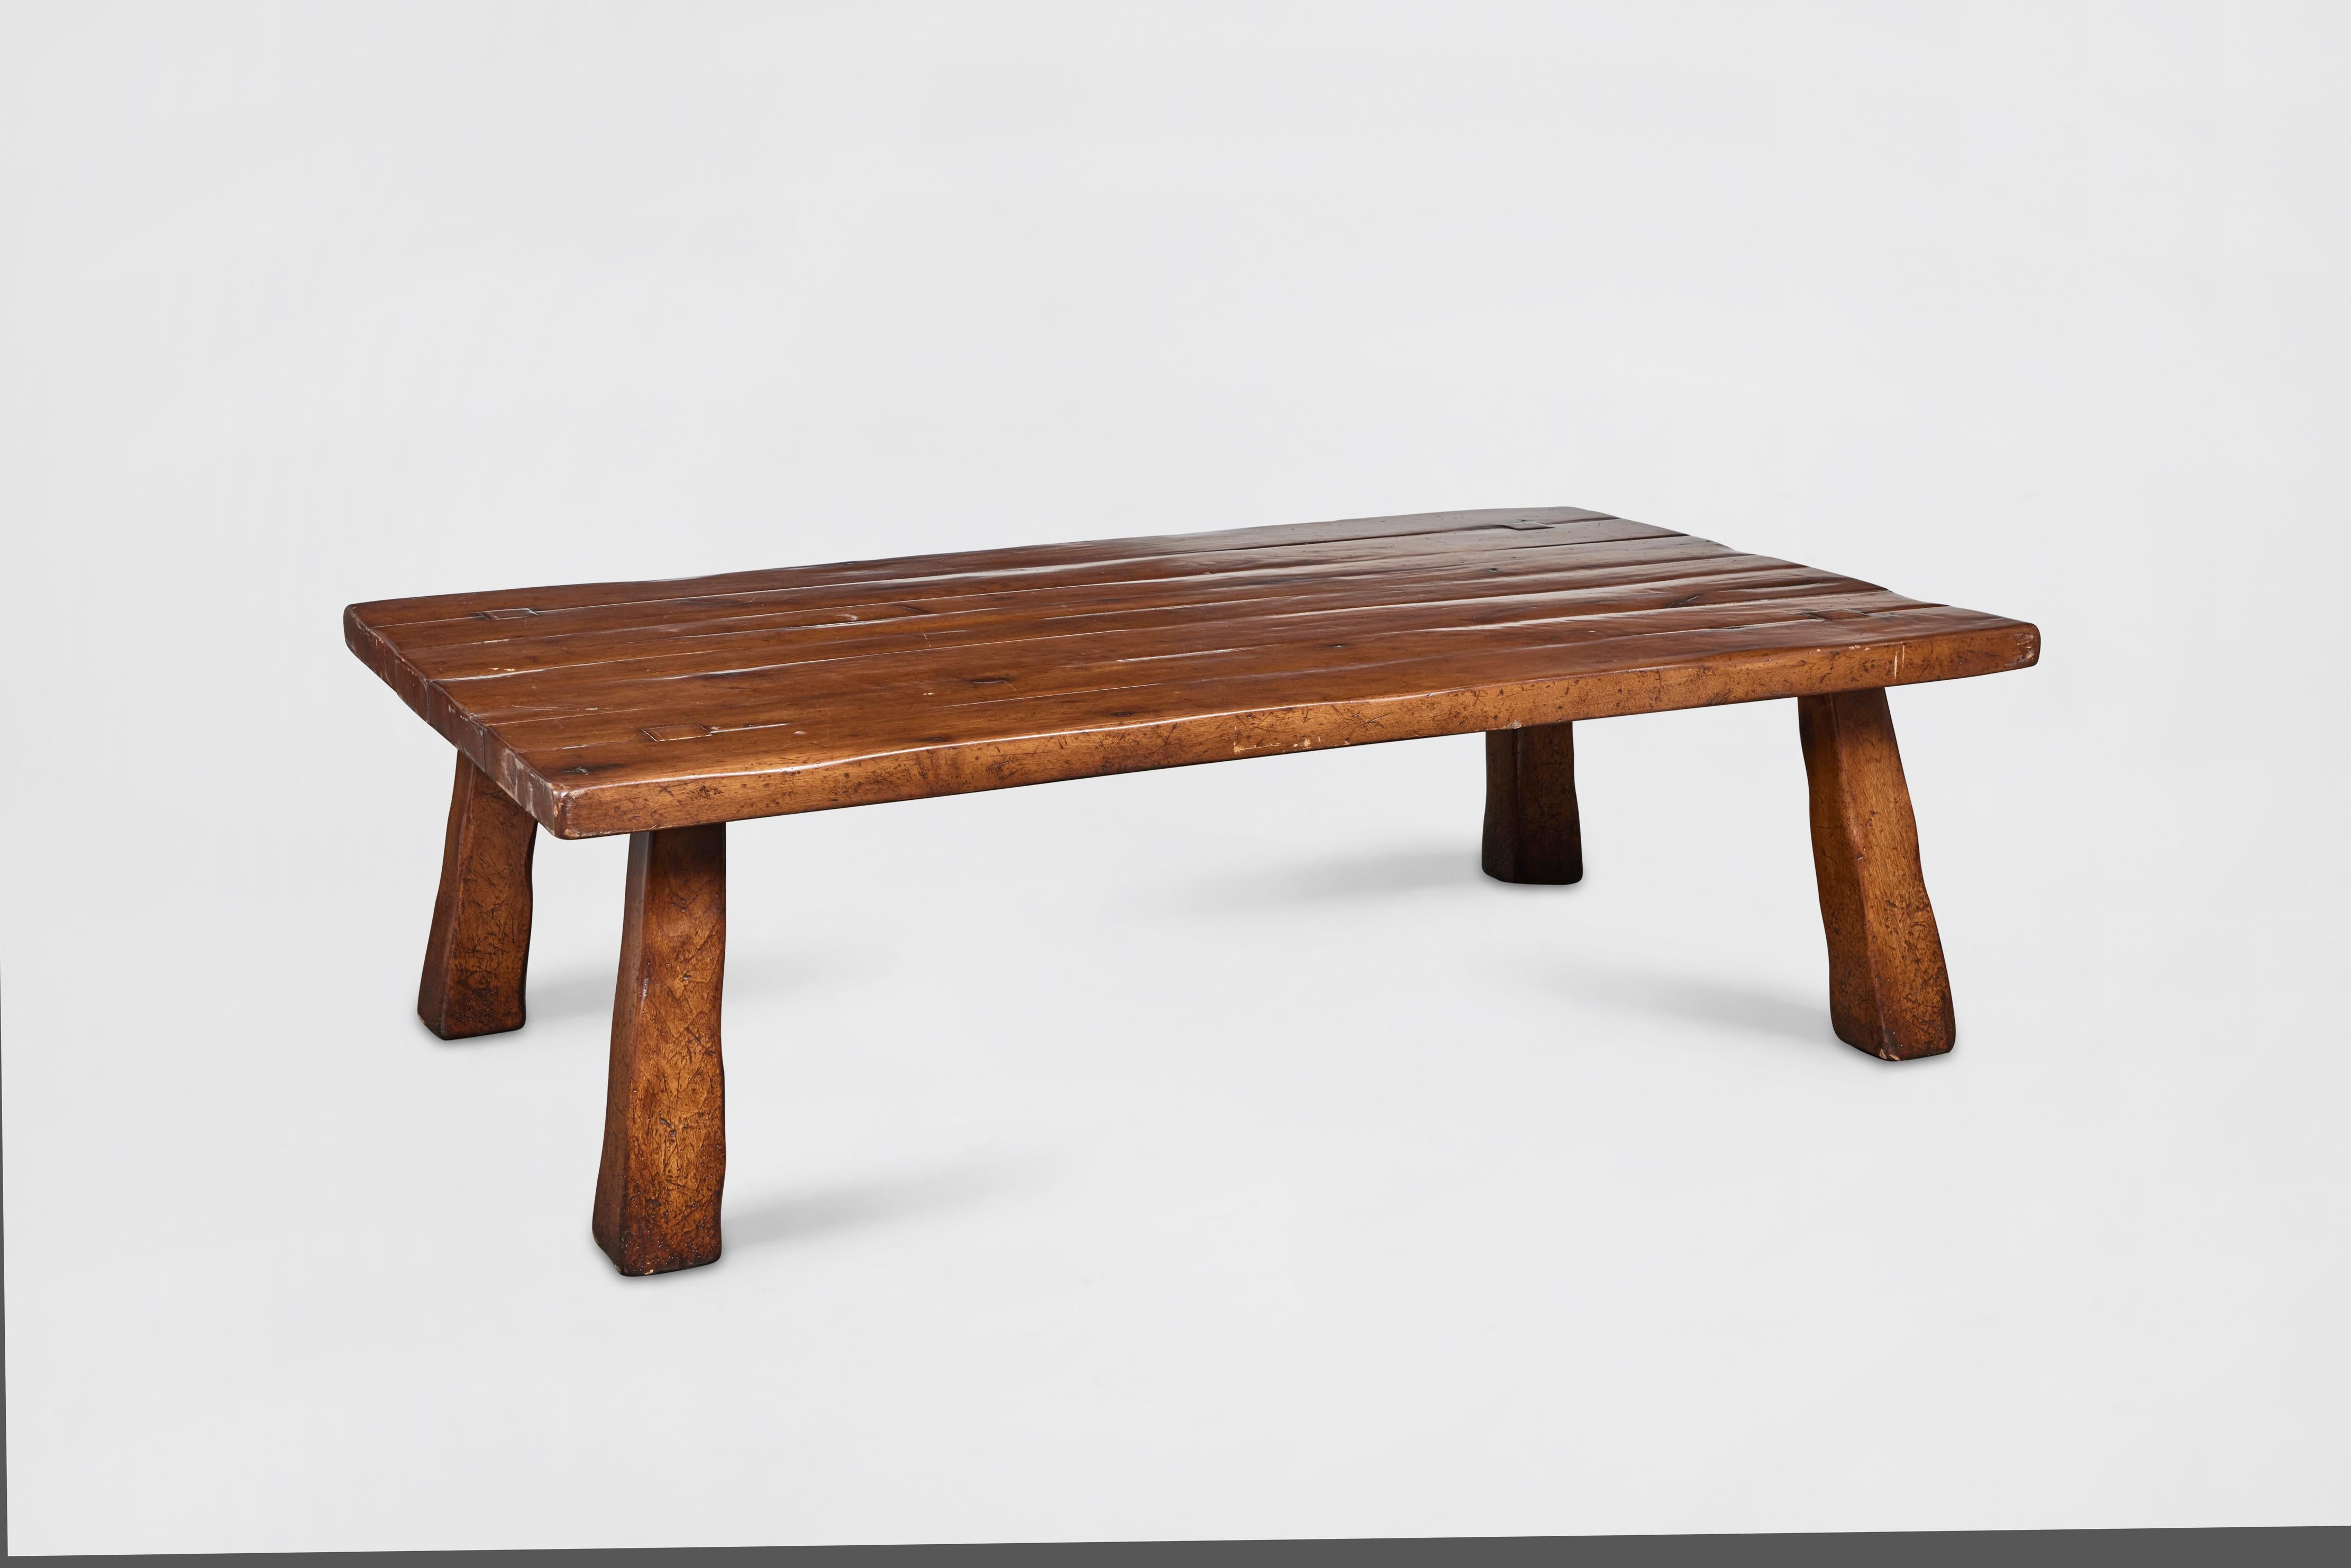 20th century mahogany plank-top rectangular coffee table, with splayed organic shaped legs. Made by John Hall Designs, Los Angeles, 1990. 